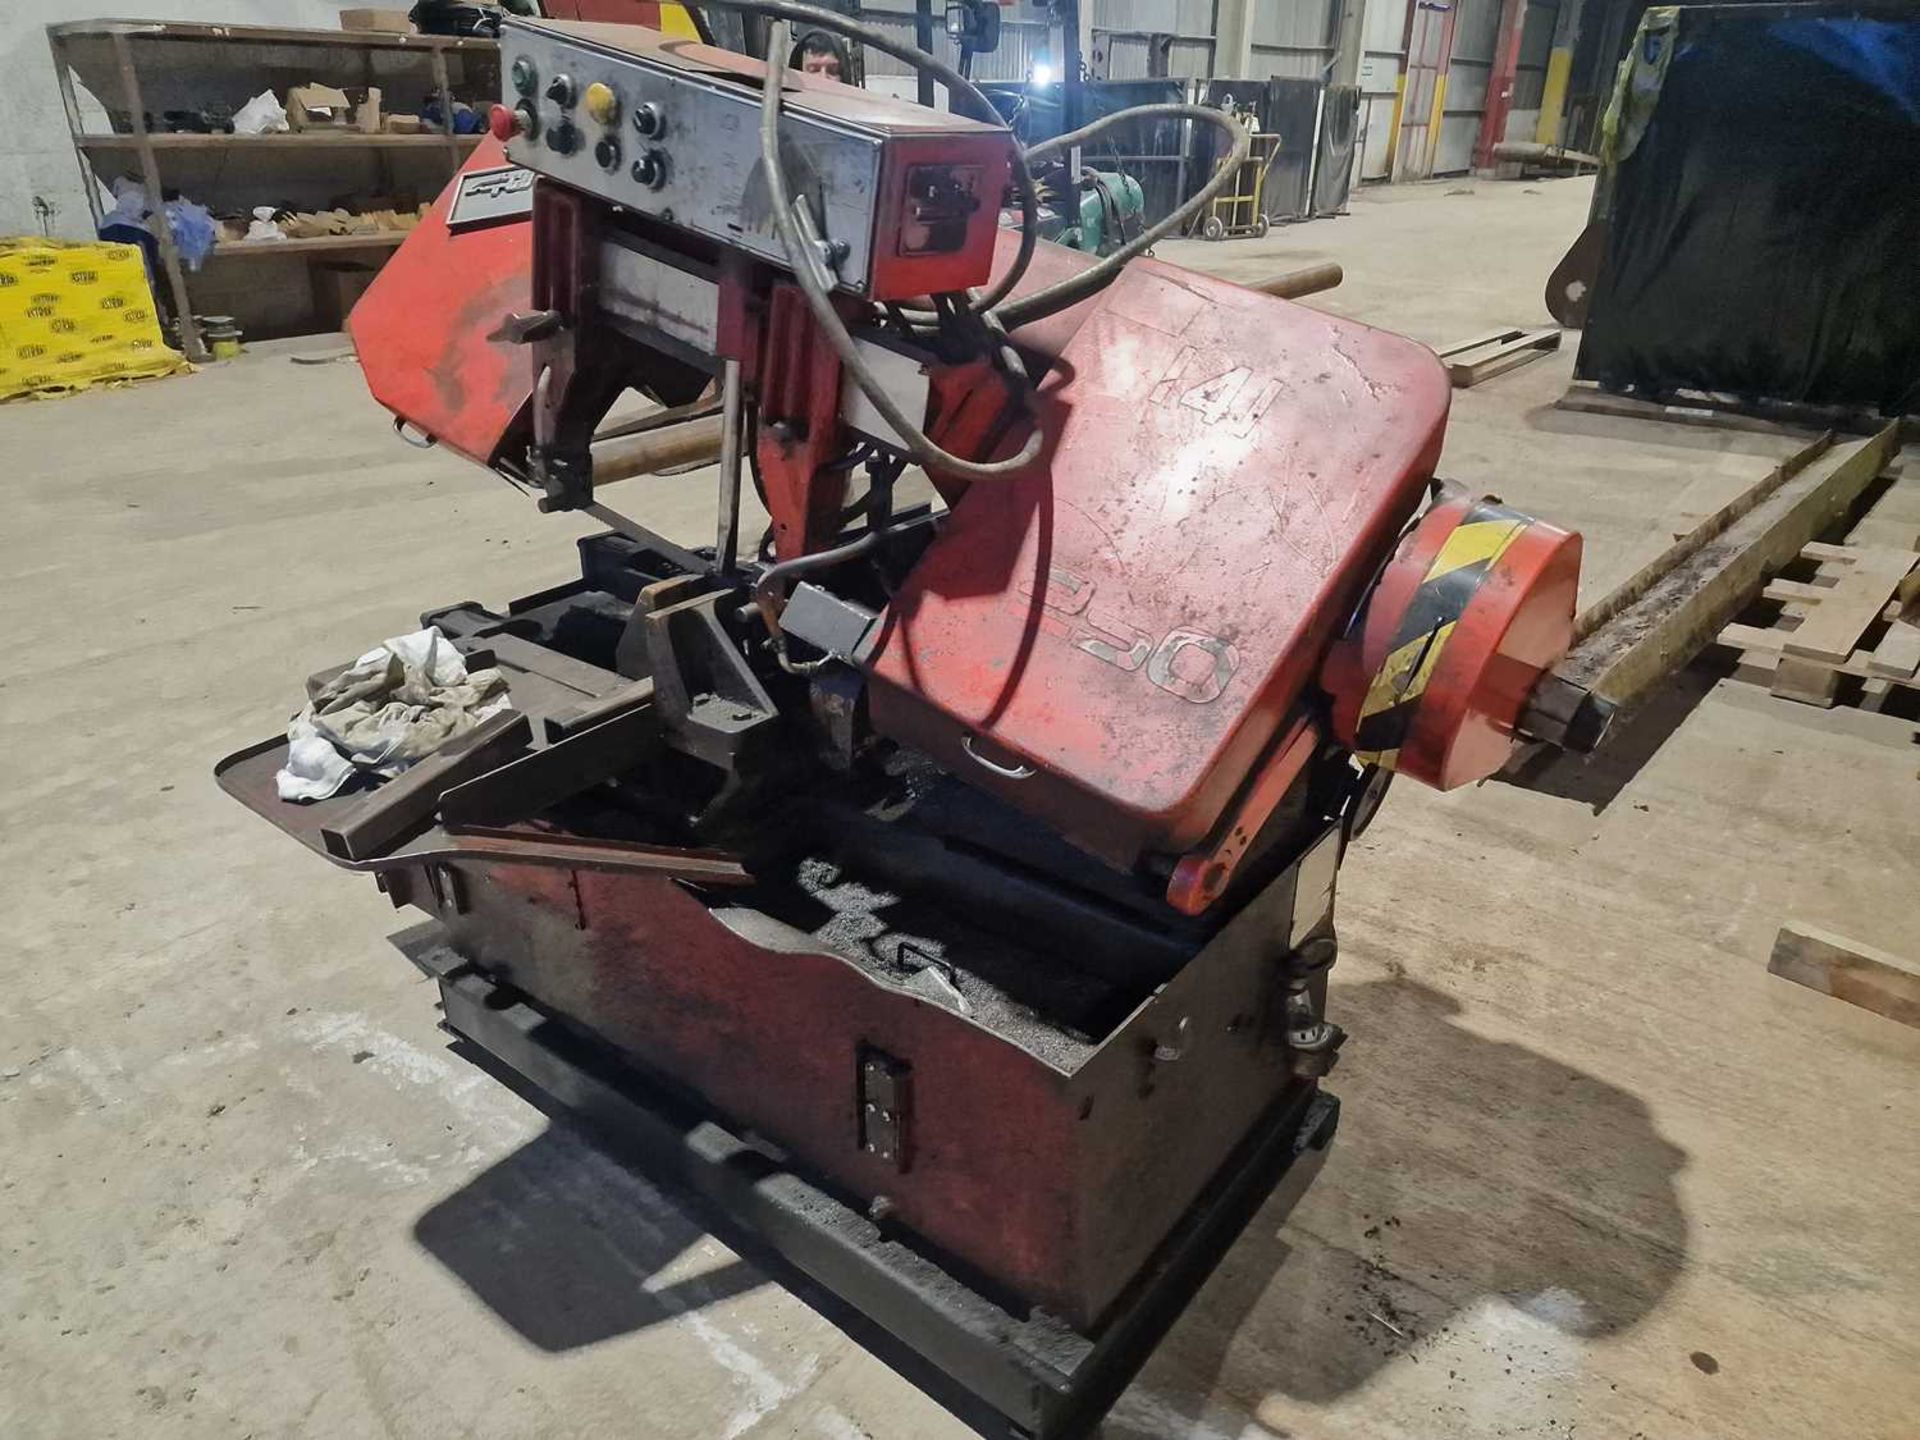 1989 Amada Cutmaster HA-250 415 Volt Band Saw (BEING SOLD FROM PICS) - Image 2 of 12